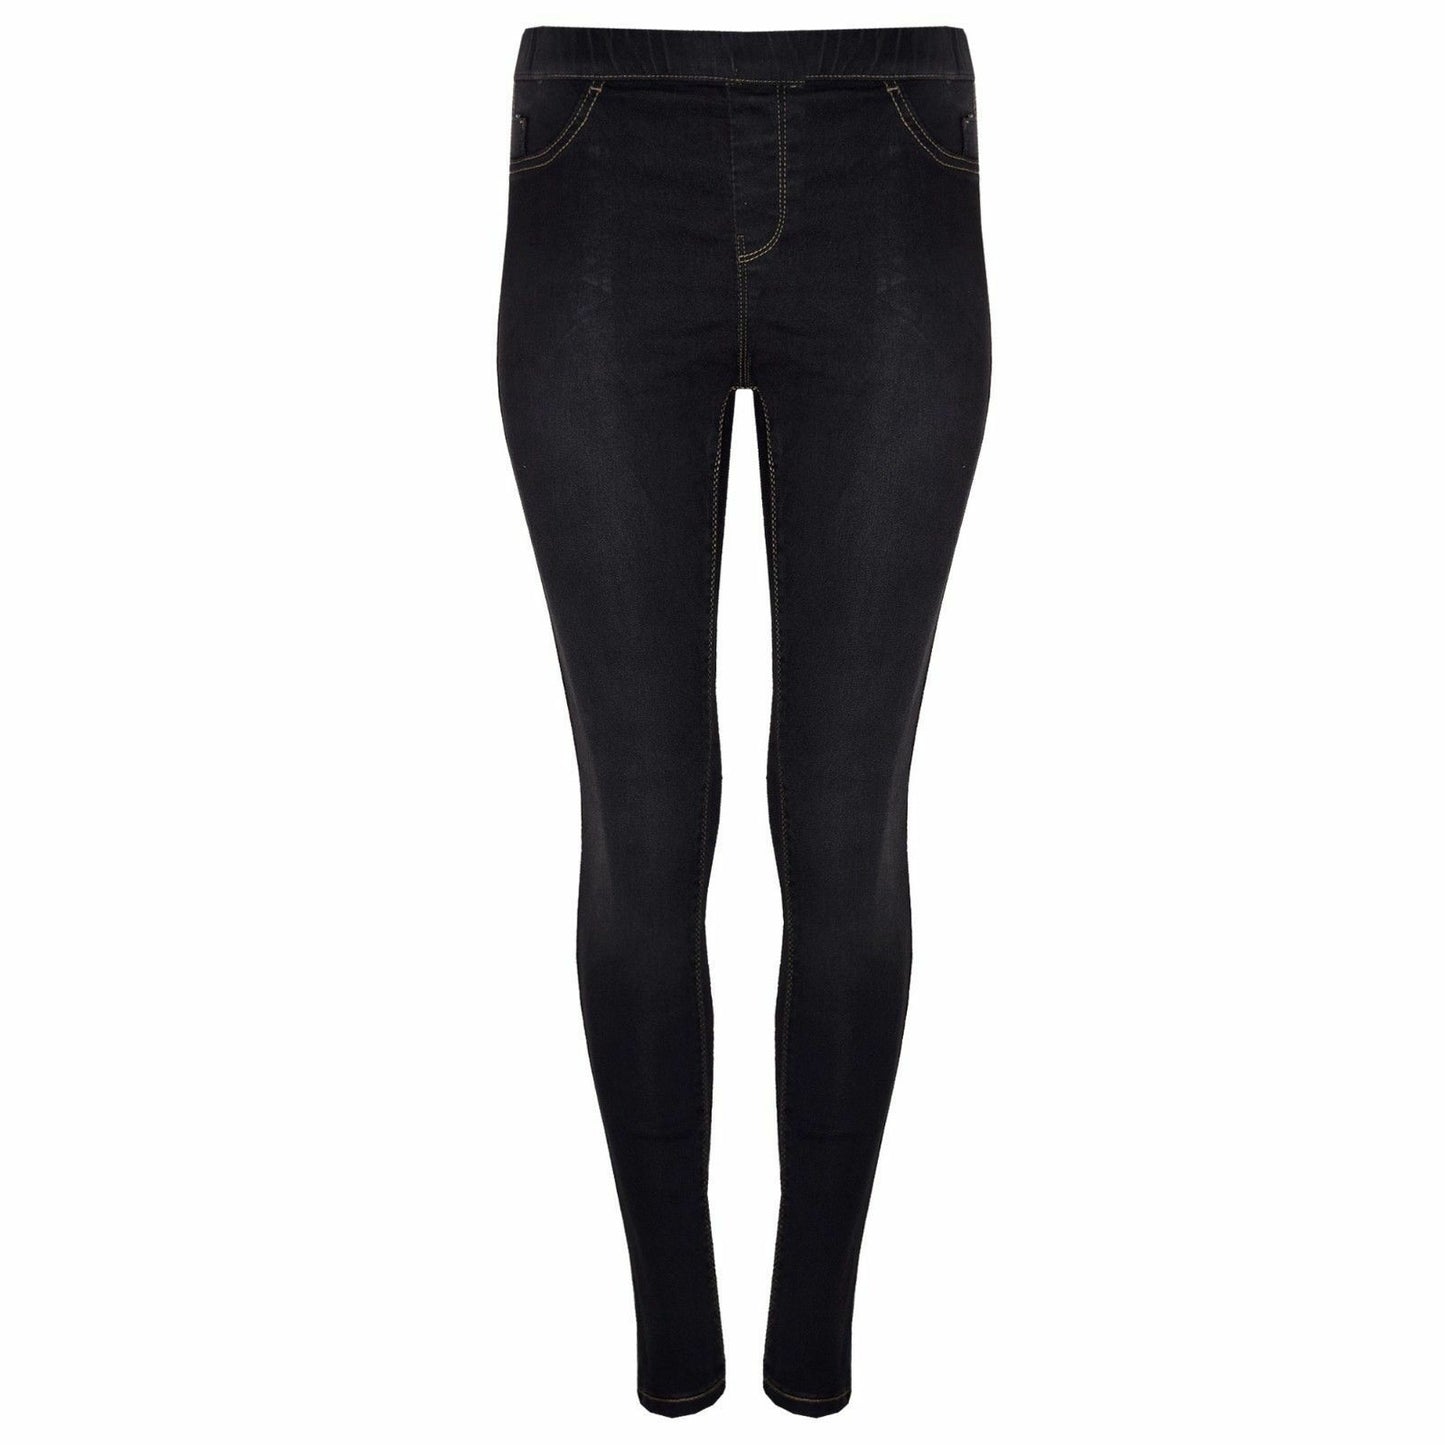 Ladies Black Denim Stretch Jeggings. They Have An Elasticated Waist And A stretch Fit. Sizes 20-28 Available.